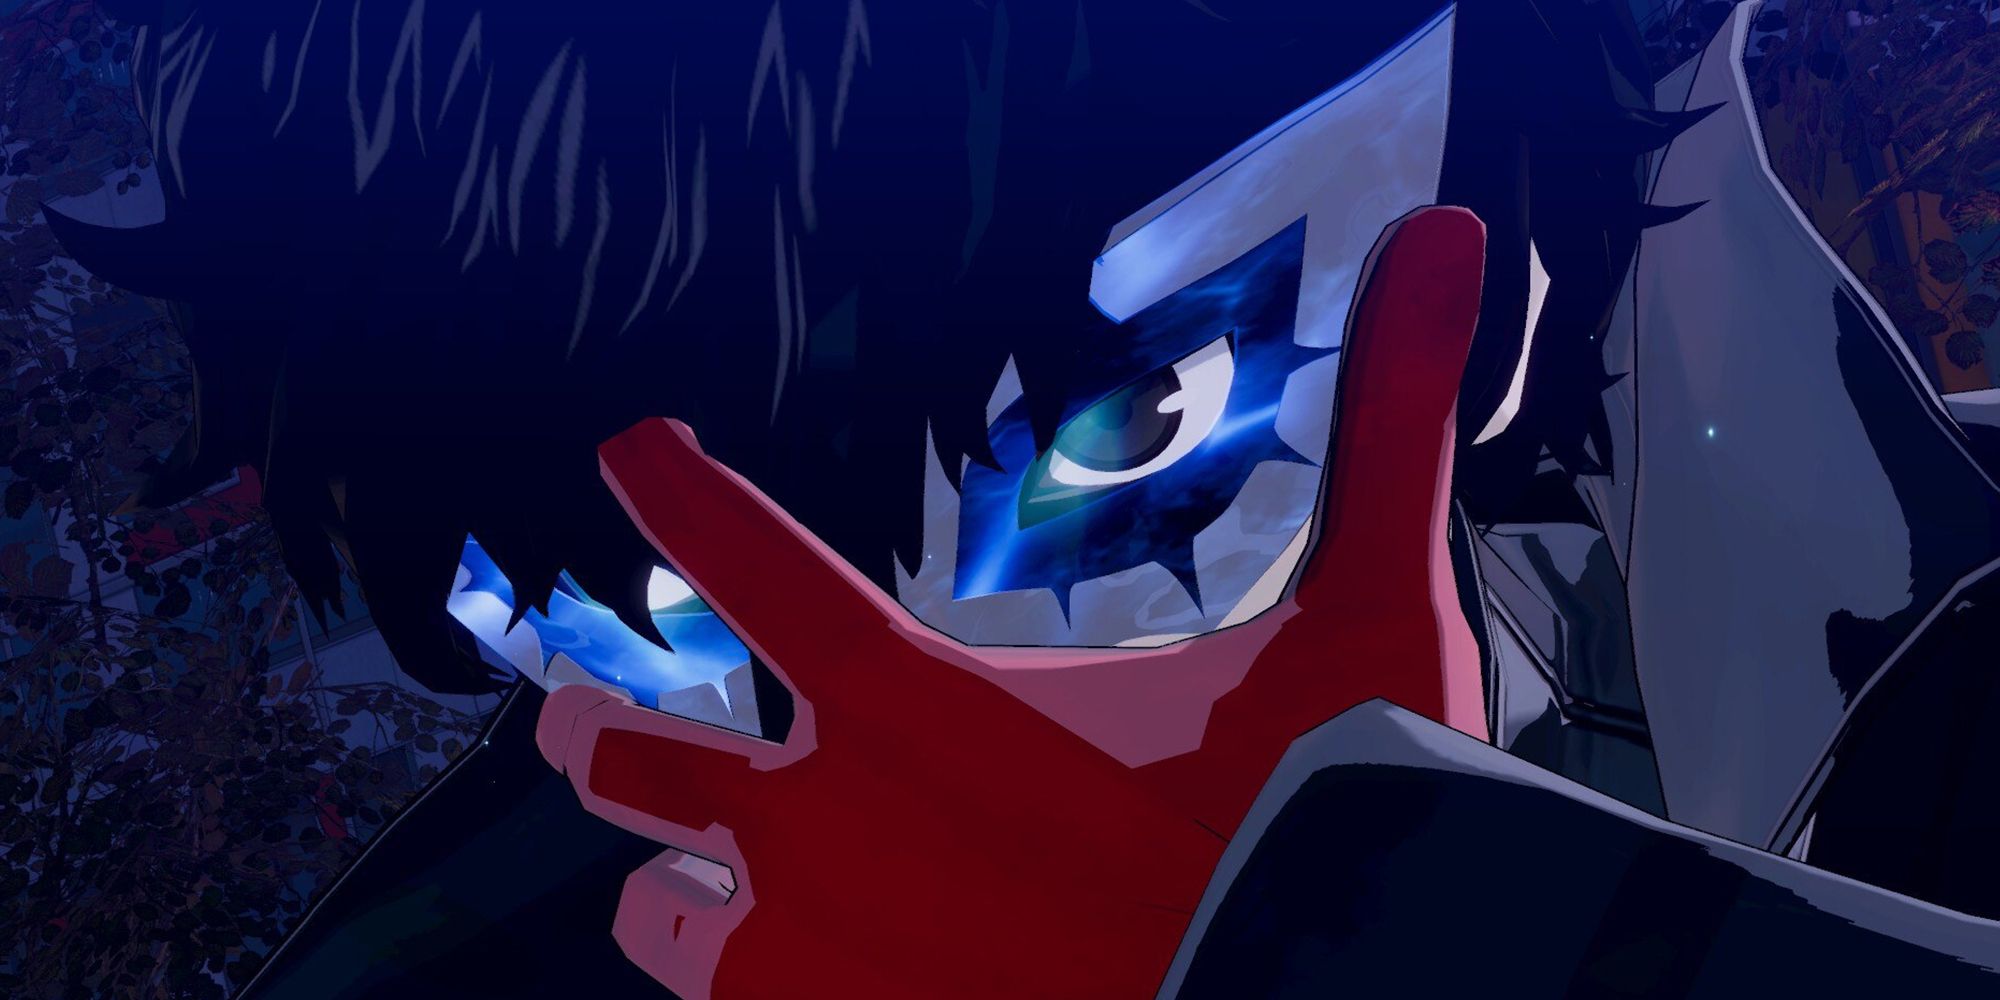 Persona 5 Strikers - Joker Creating A Mask On His Face